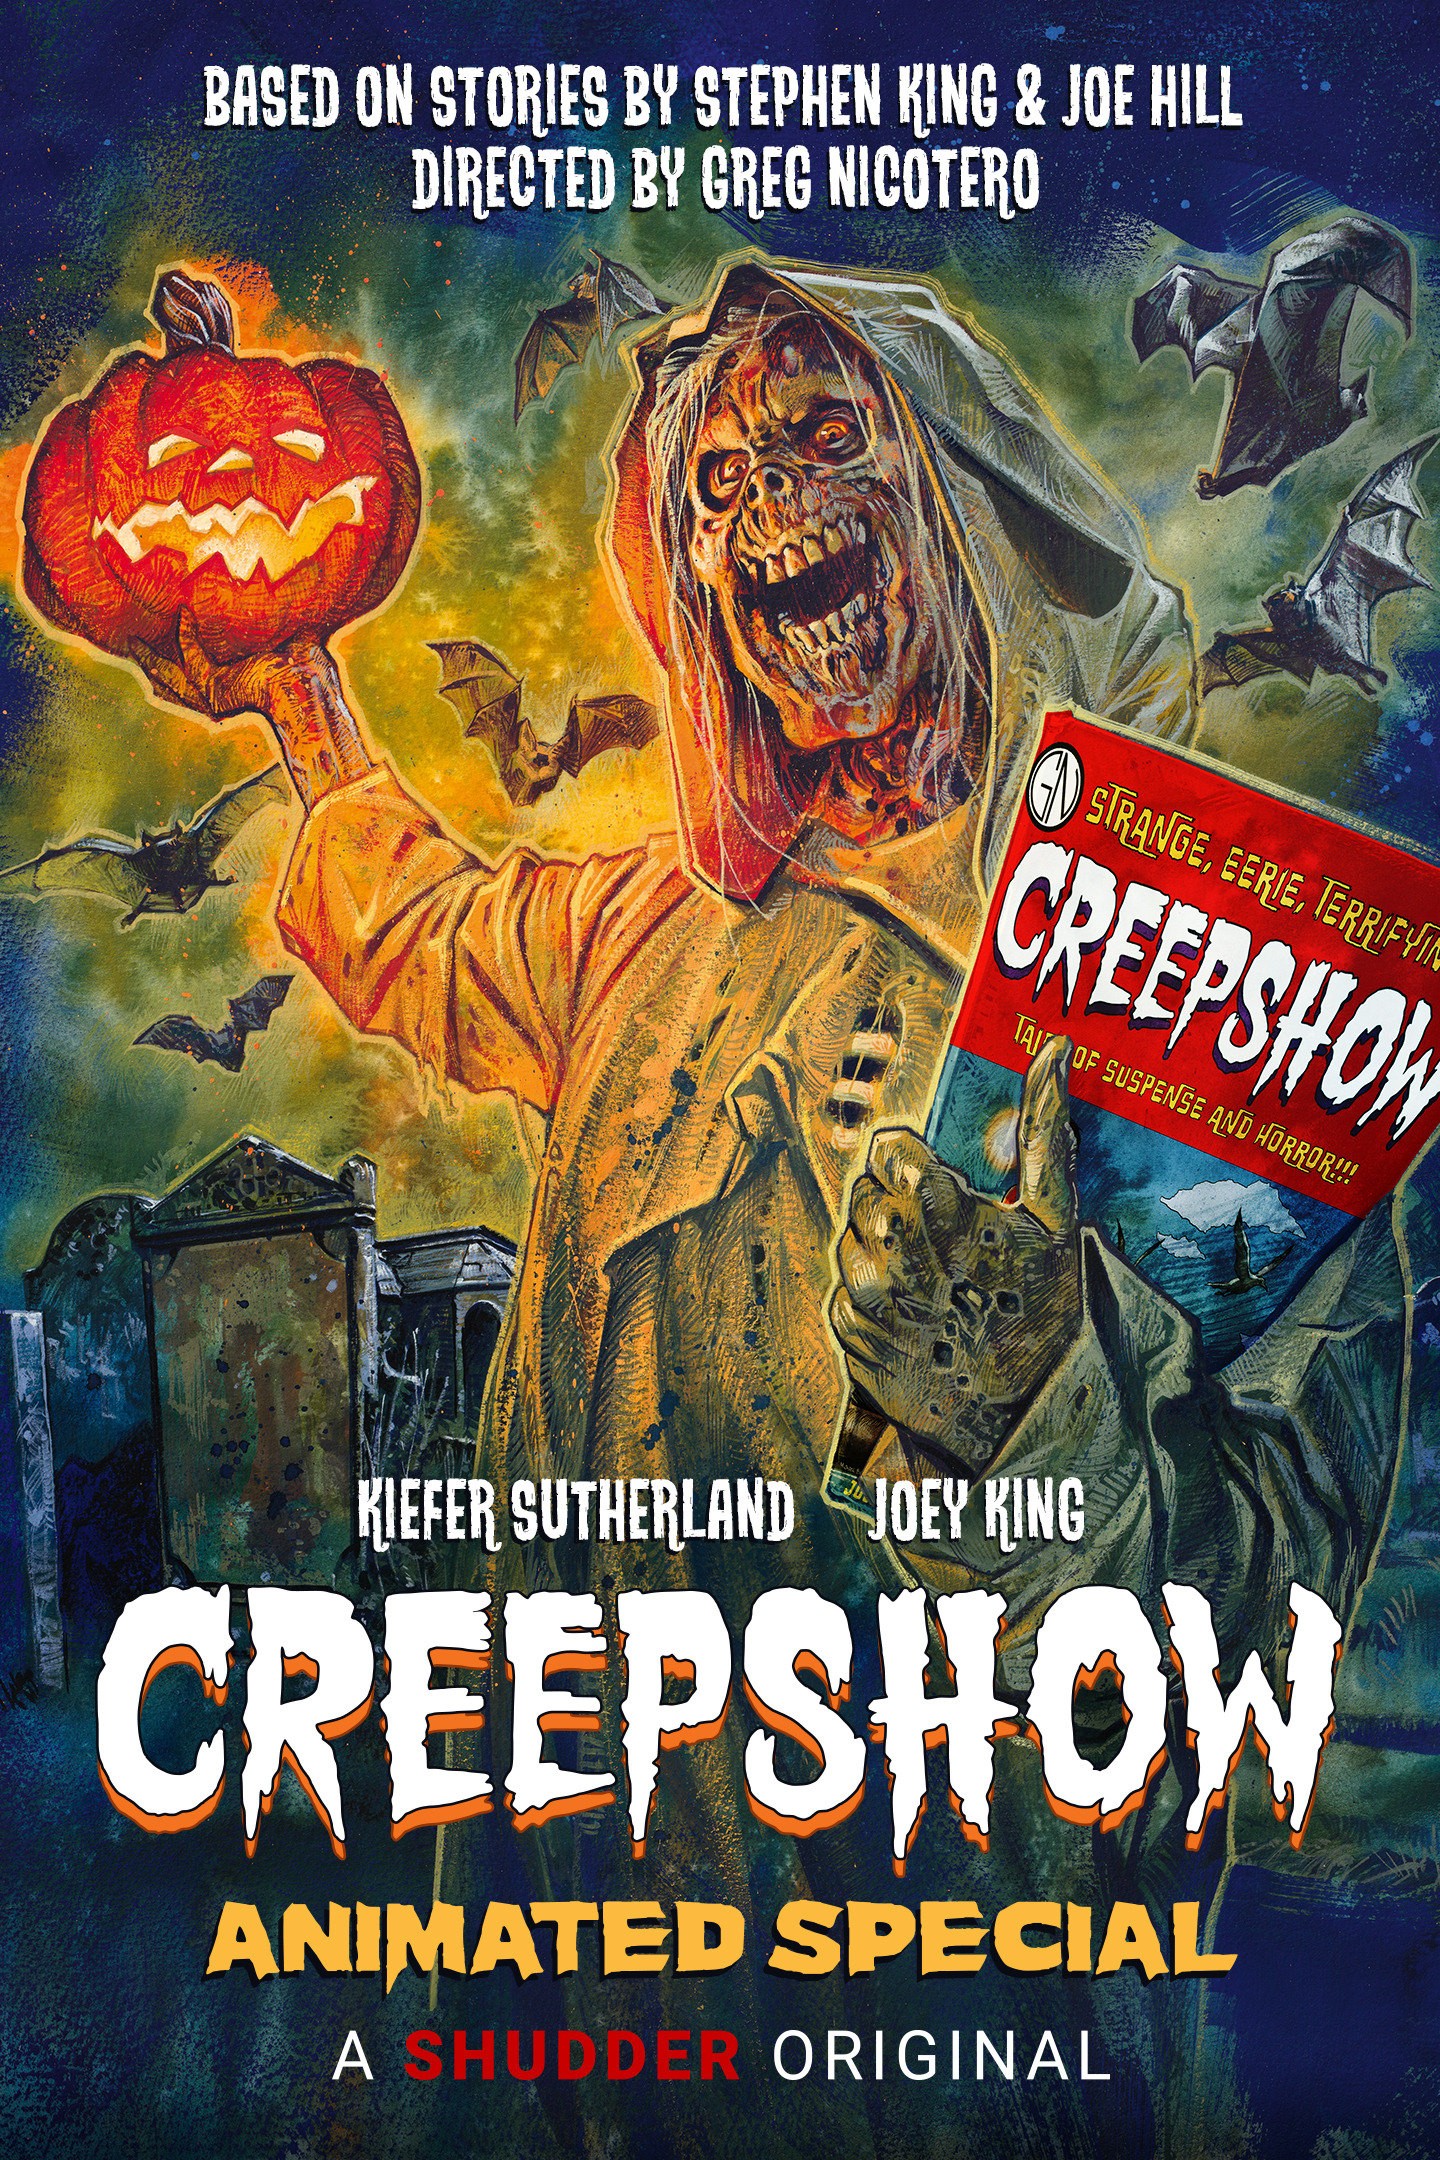 Mega Sized TV Poster Image for Creepshow Animated Special 